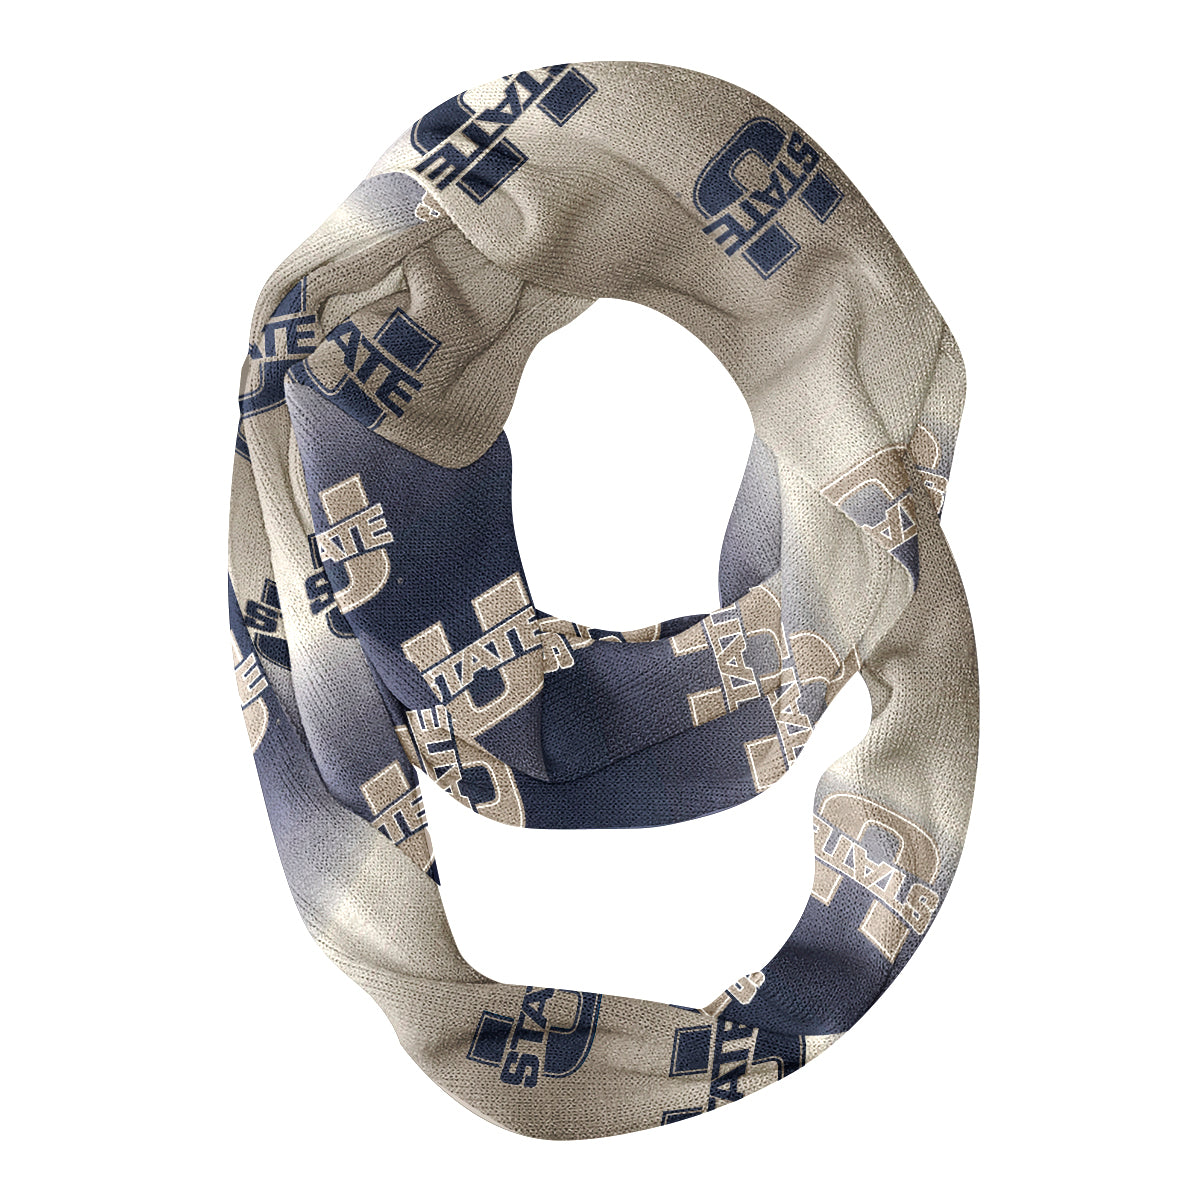 Utah State Aggies Vive La Fete All Over Logo Game Day Collegiate Women Ultra Soft Knit Infinity Scarf